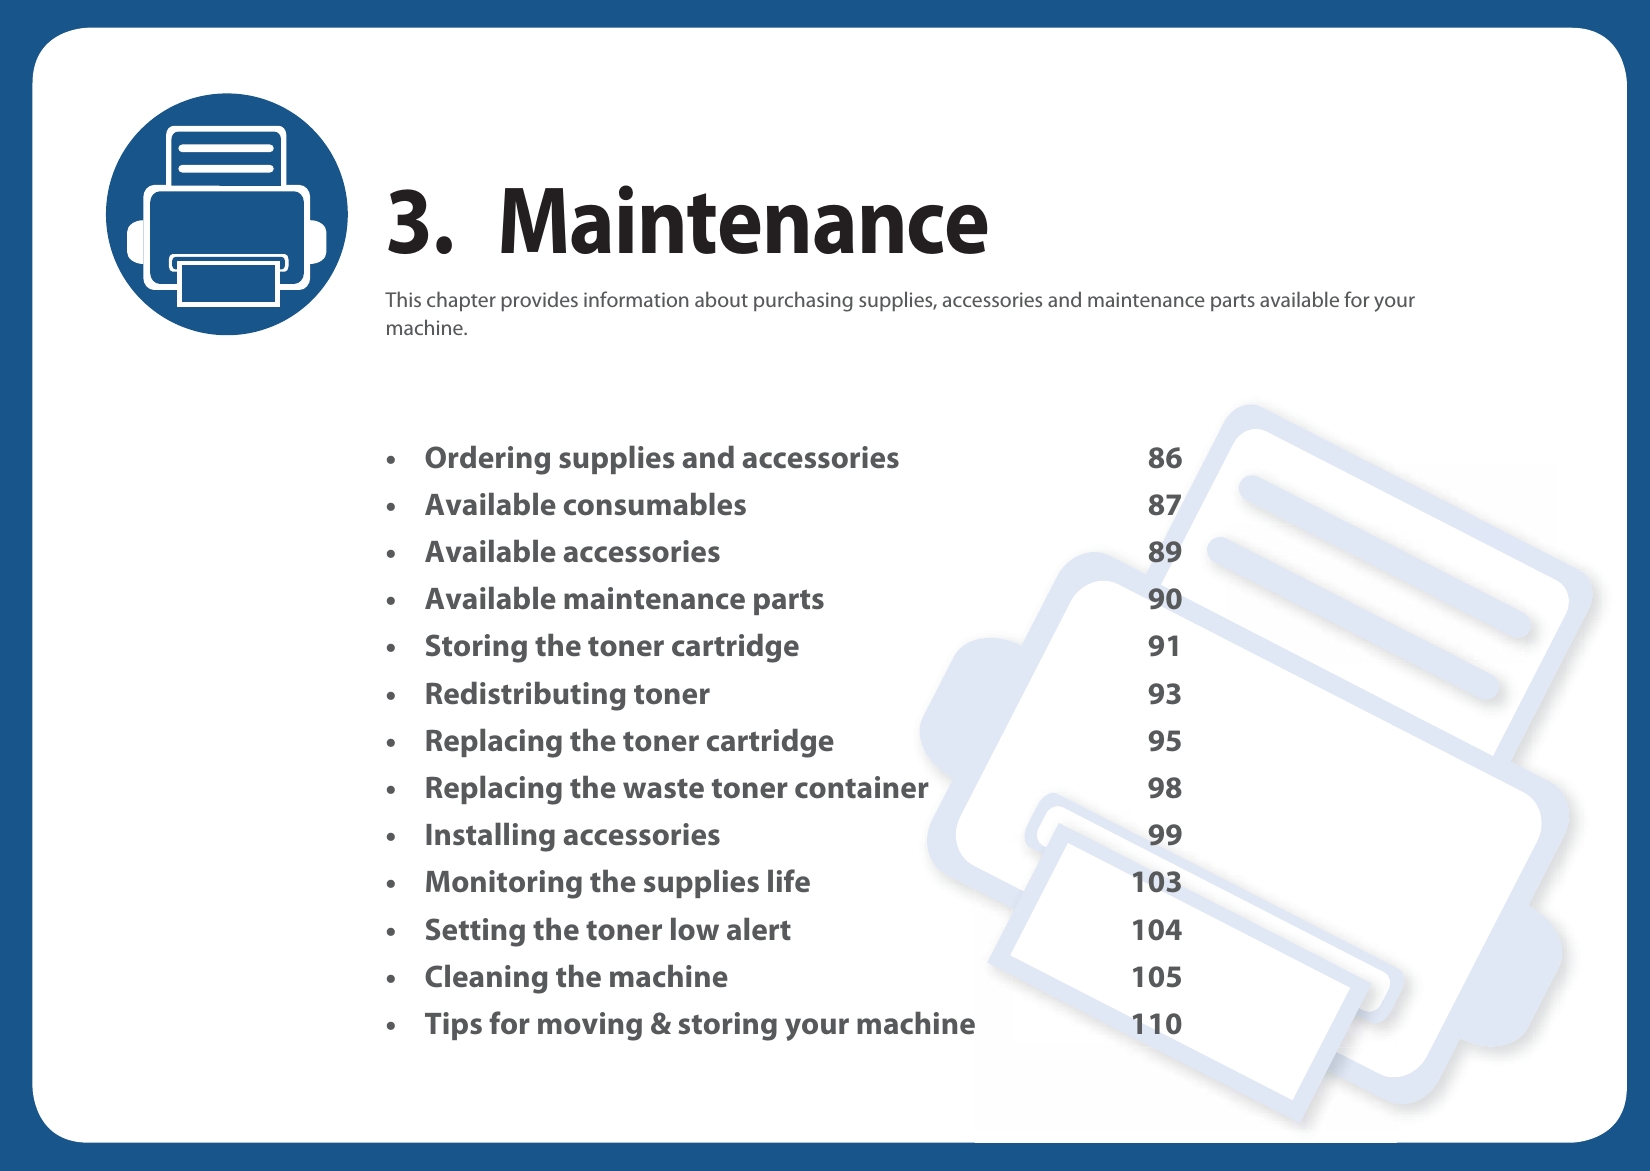 3. MaintenanceThis chapter provides information about purchasing supplies, accessories and maintenance parts available for your machine.• Ordering supplies and accessories 86• Available consumables 87• Available accessories 89• Available maintenance parts 90• Storing the toner cartridge 91• Redistributing toner 93• Replacing the toner cartridge 95• Replacing the waste toner container 98• Installing accessories 99• Monitoring the supplies life 103• Setting the toner low alert 104• Cleaning the machine 105• Tips for moving &amp; storing your machine 110